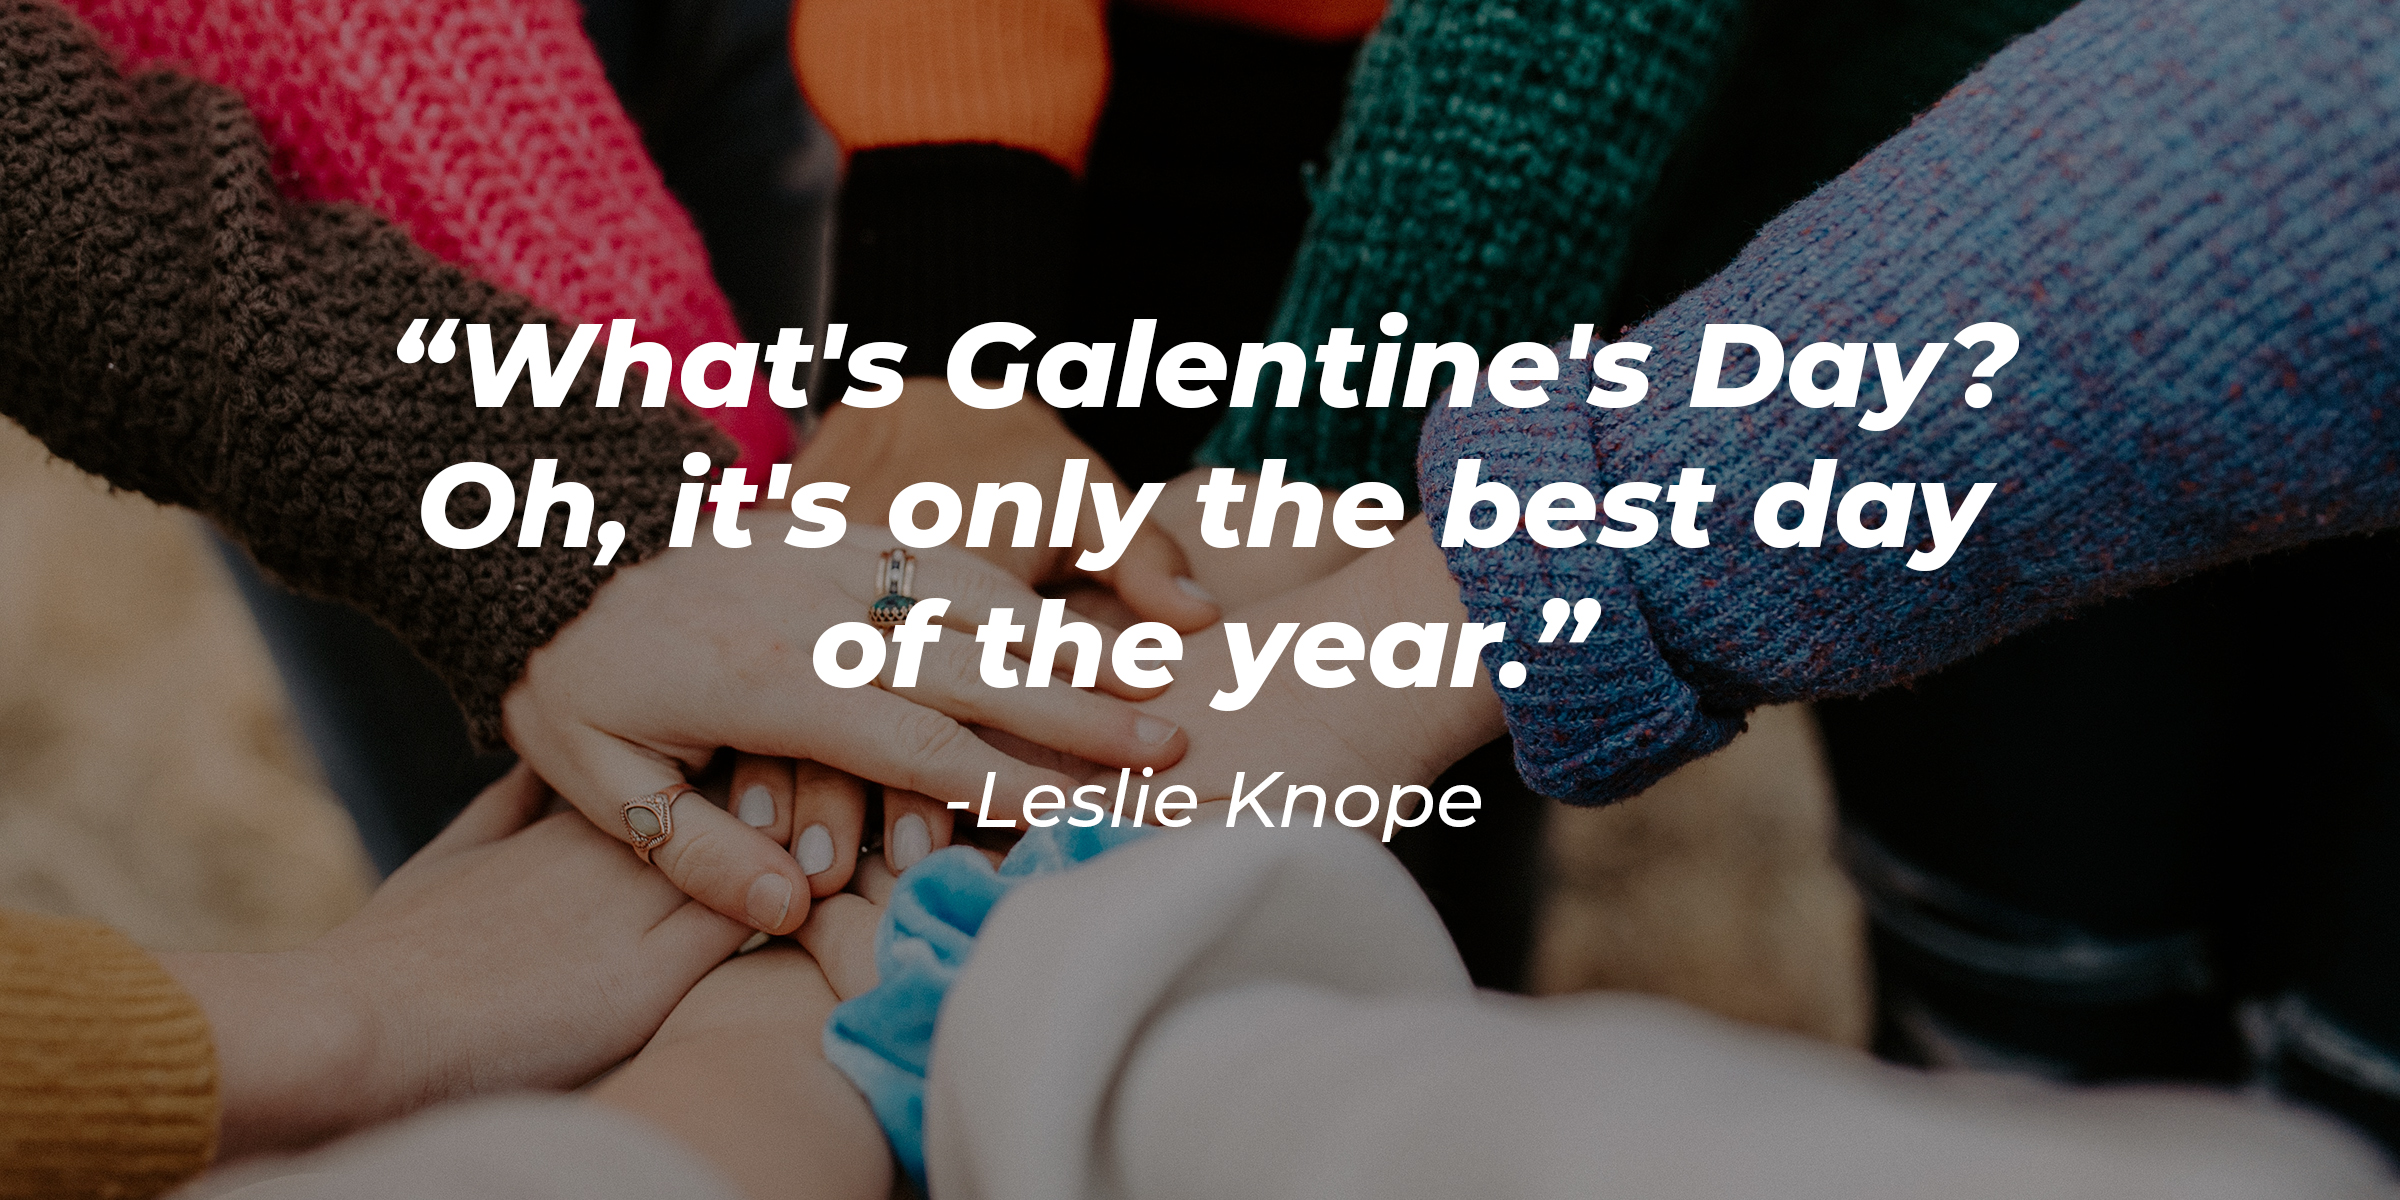 Leslie Knope's quote: "What's Galentine's Day? Oh, it's only the best day of the year." | Source: Unsplash